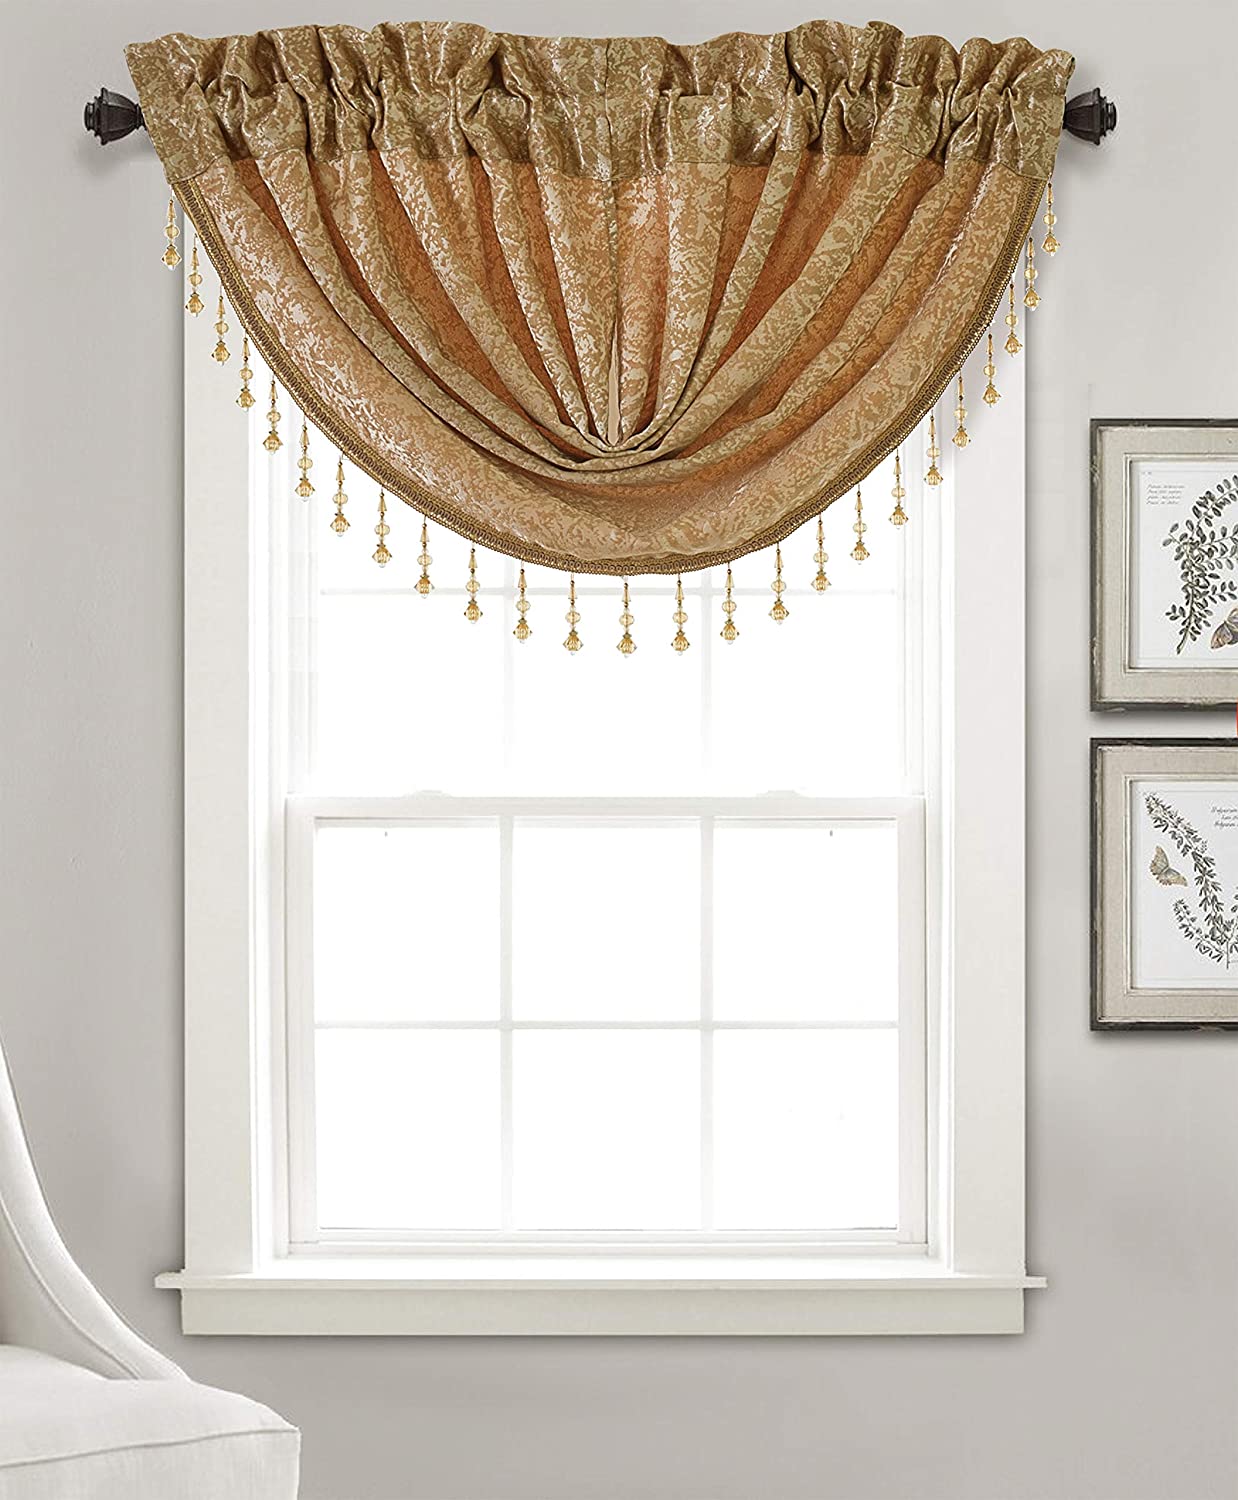 Mulino Textured Jacquard 48 x 37 in. Swag Valance - Linen Universe Co.